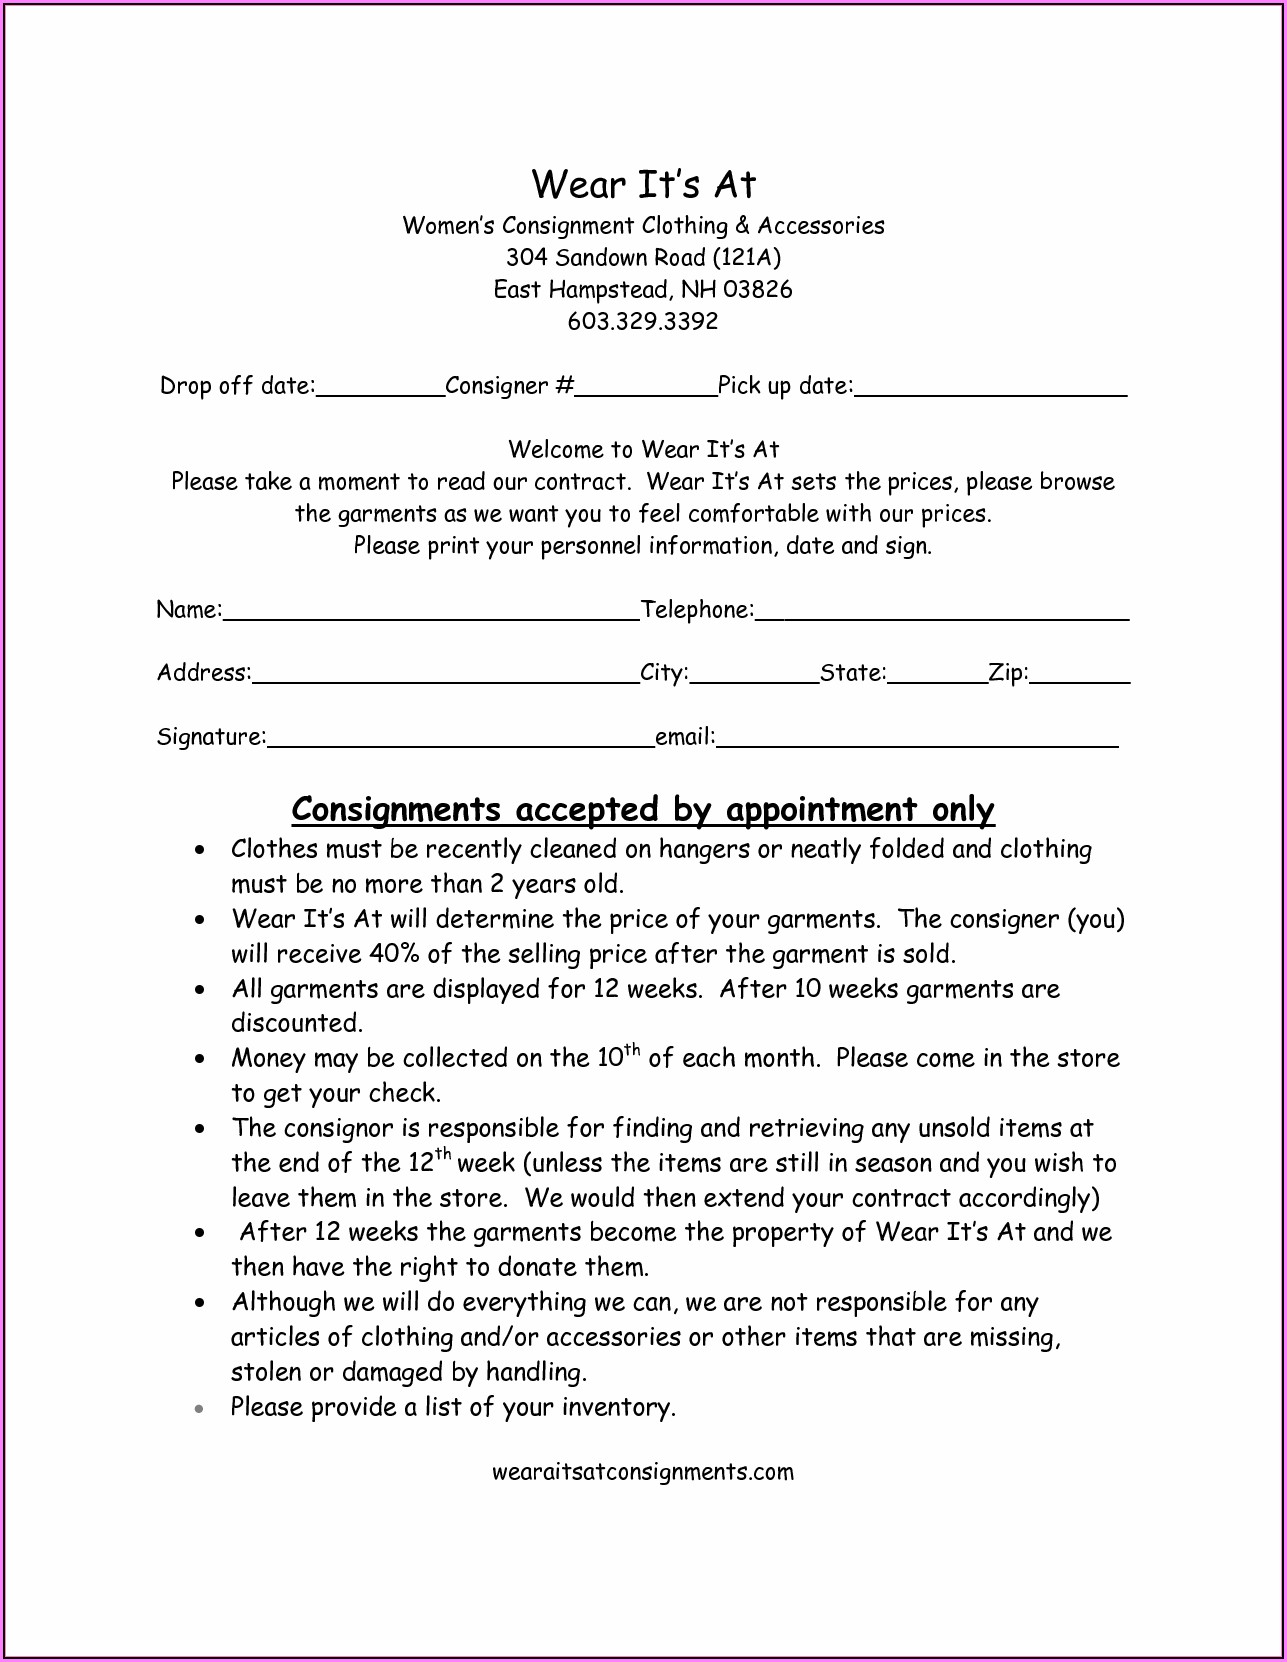 Consignment Contract Template